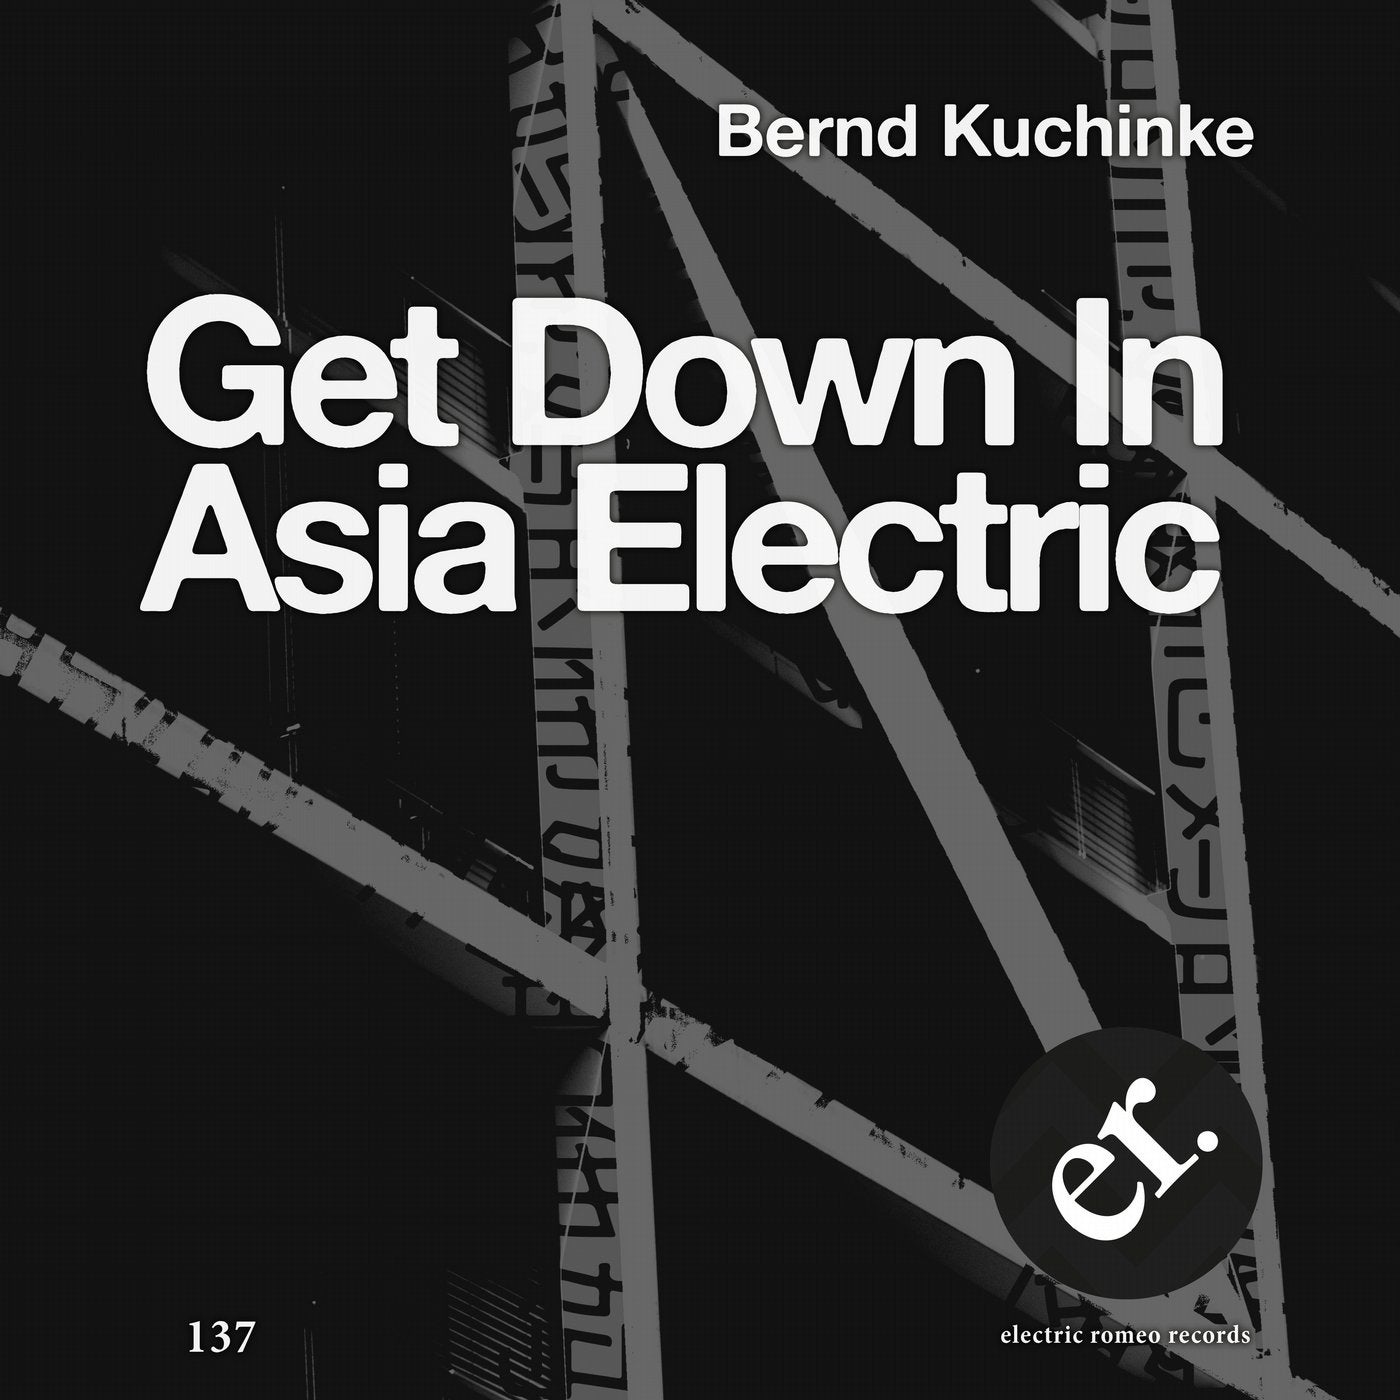 Get Down in Asia Electric